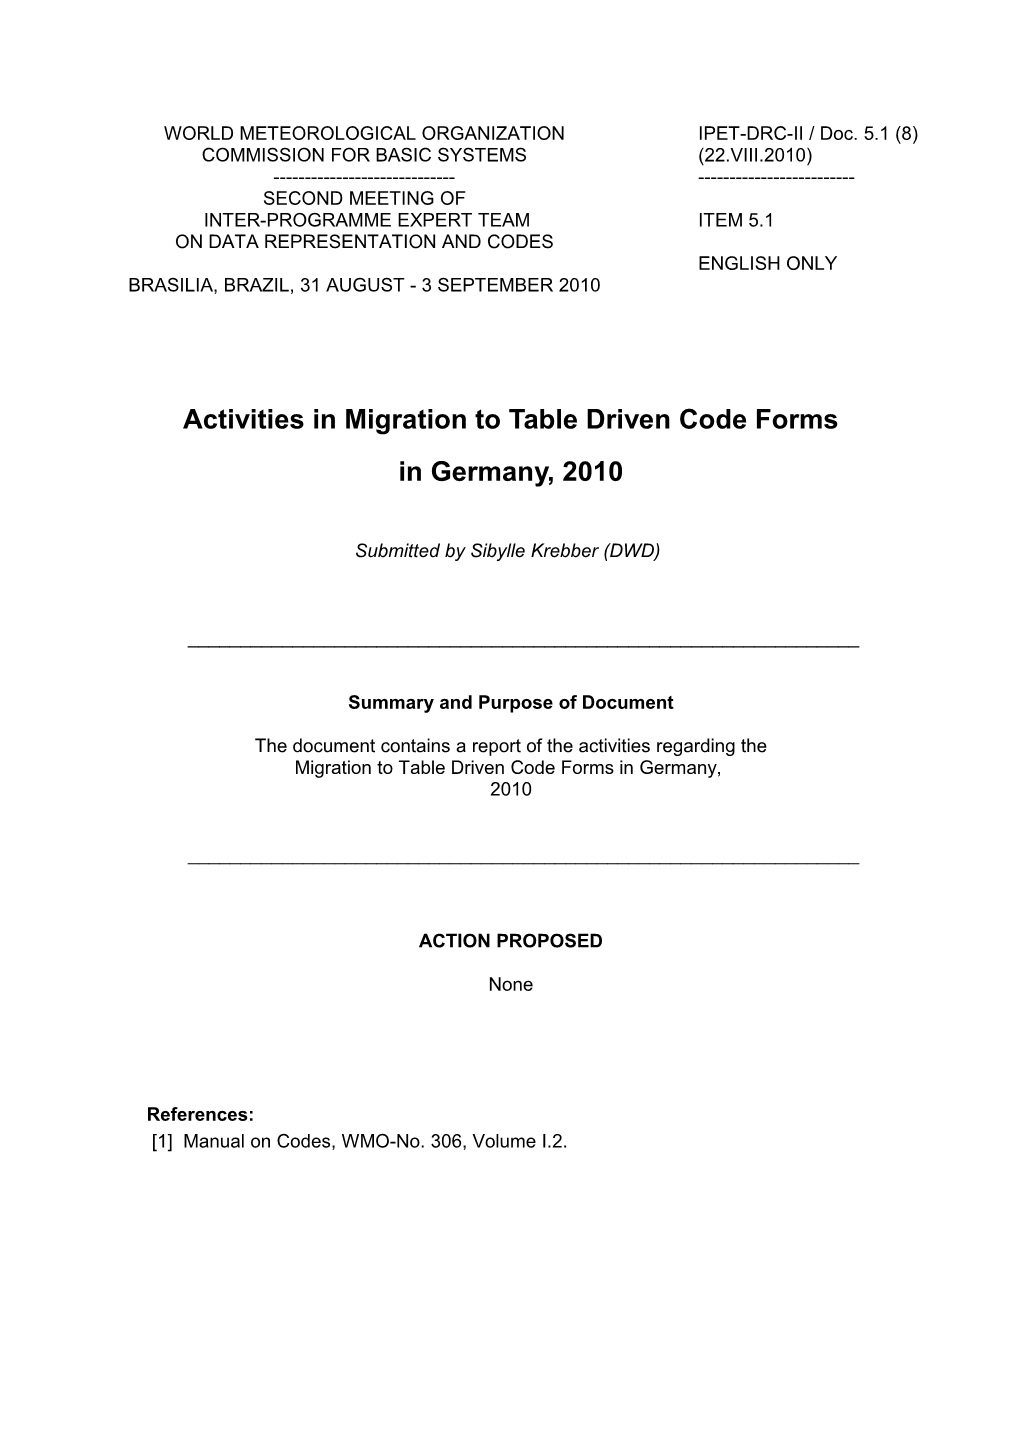 Report of Migration to TDCF